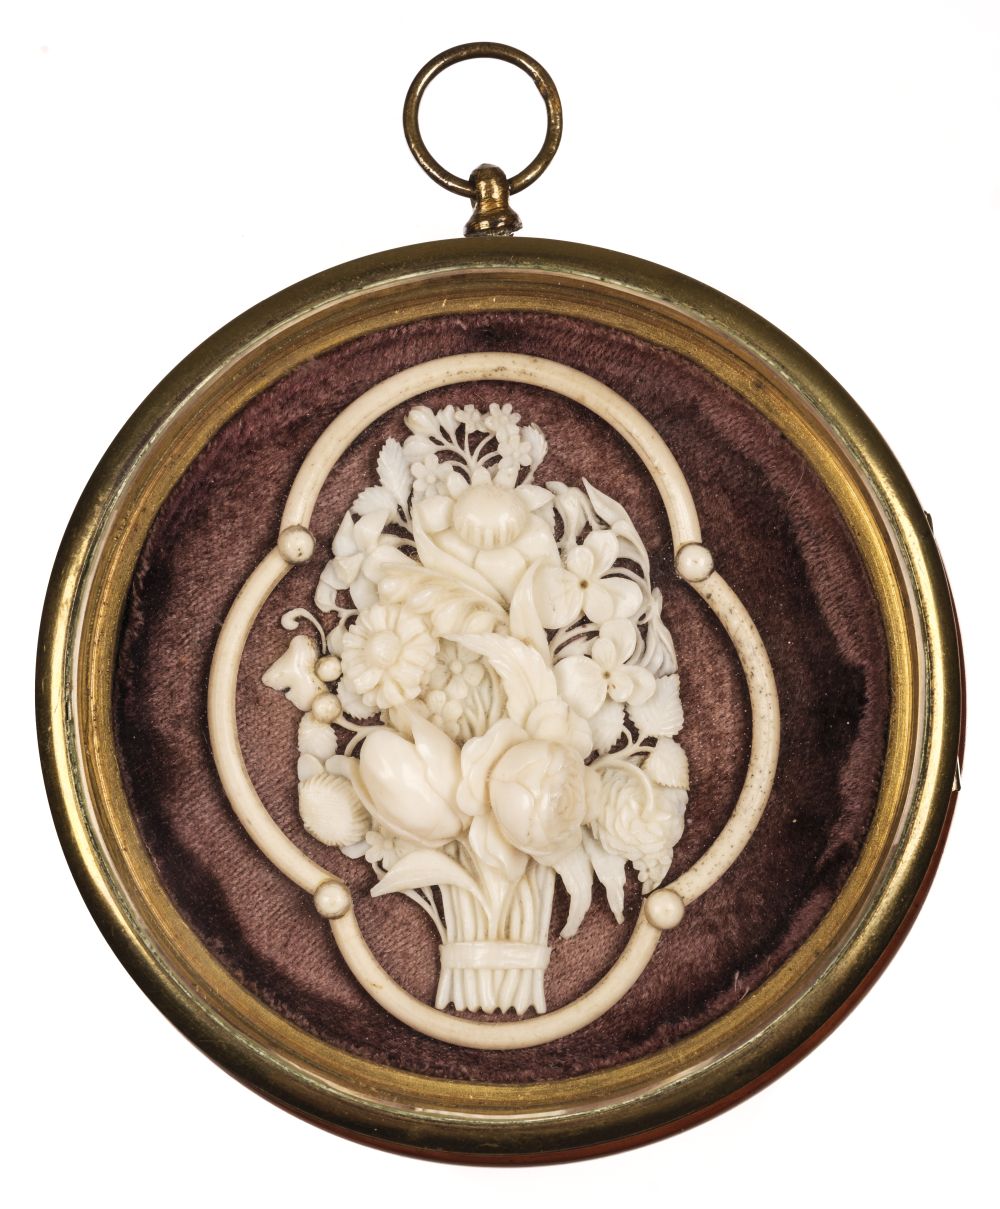 * Dieppe Ivory. 19th century Dieppe ivory floral carving